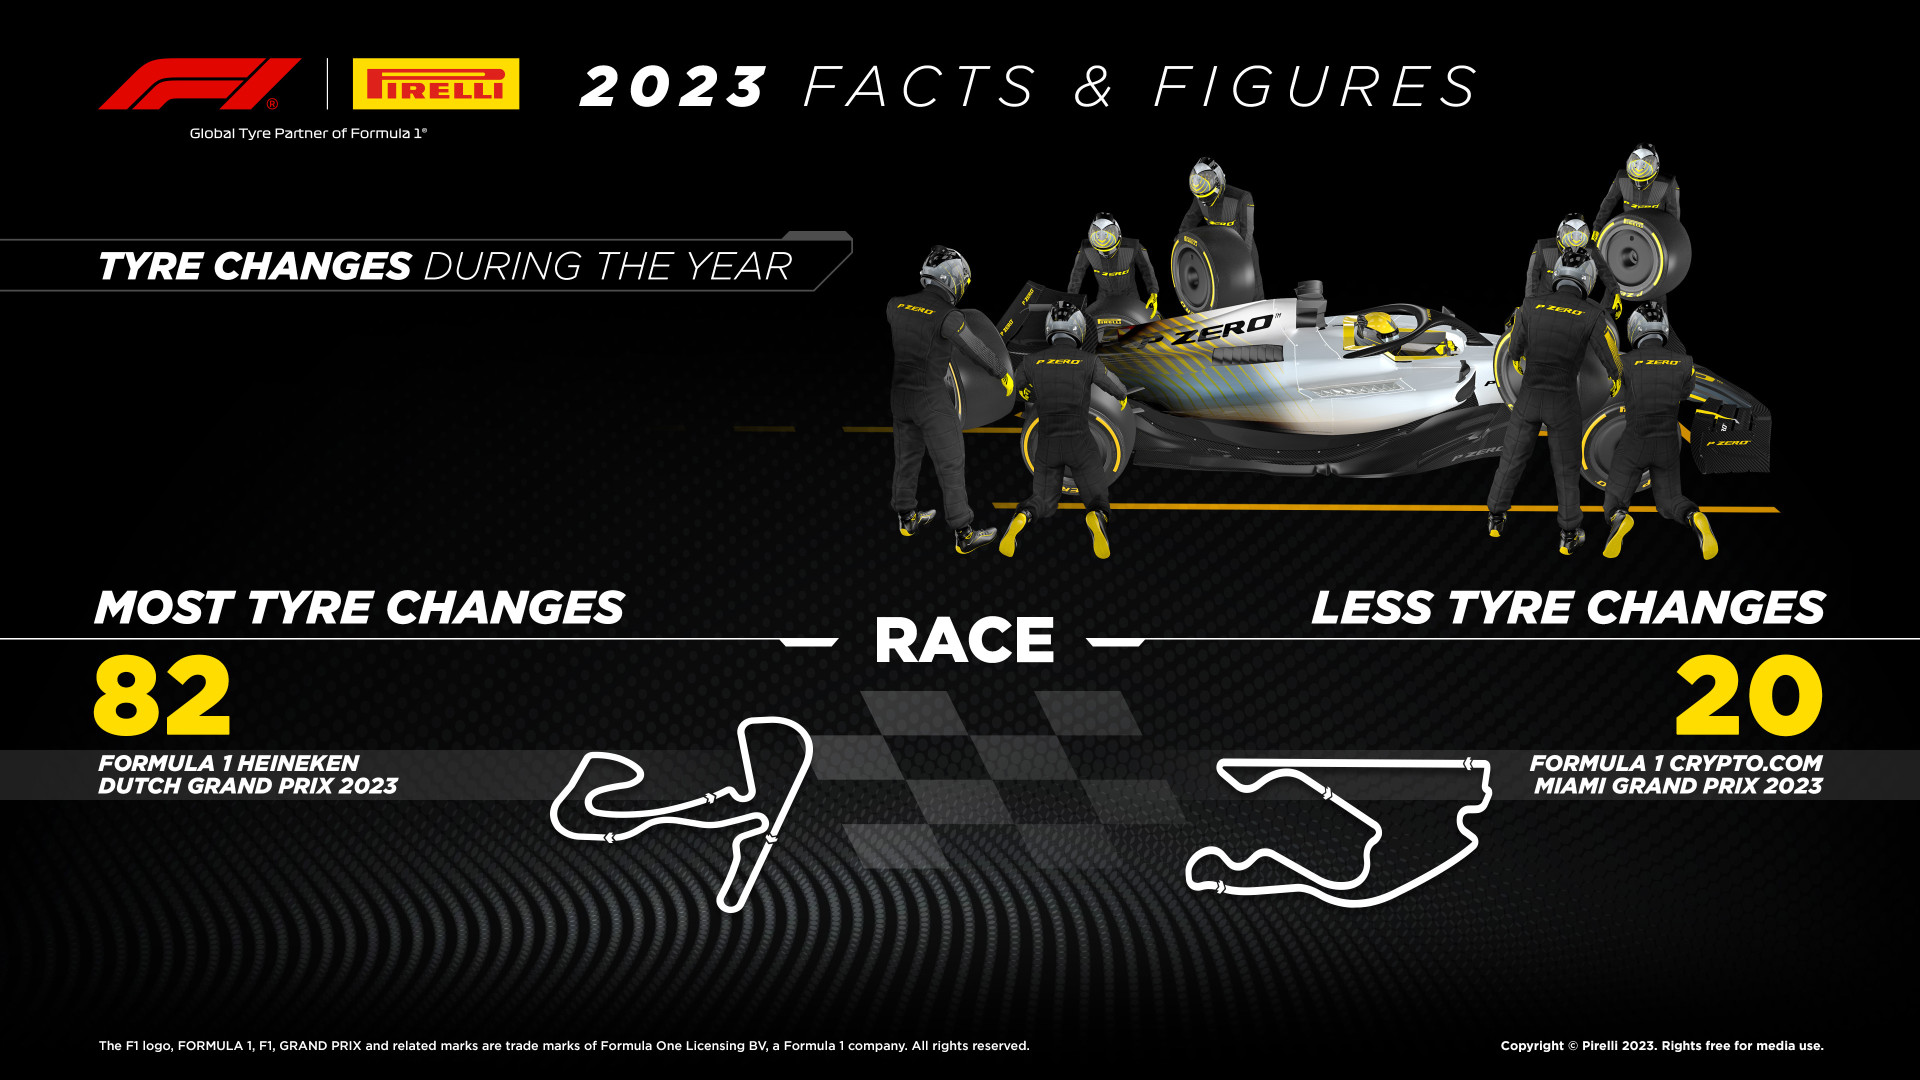 2023 Facts and Figures - Tyre Changes